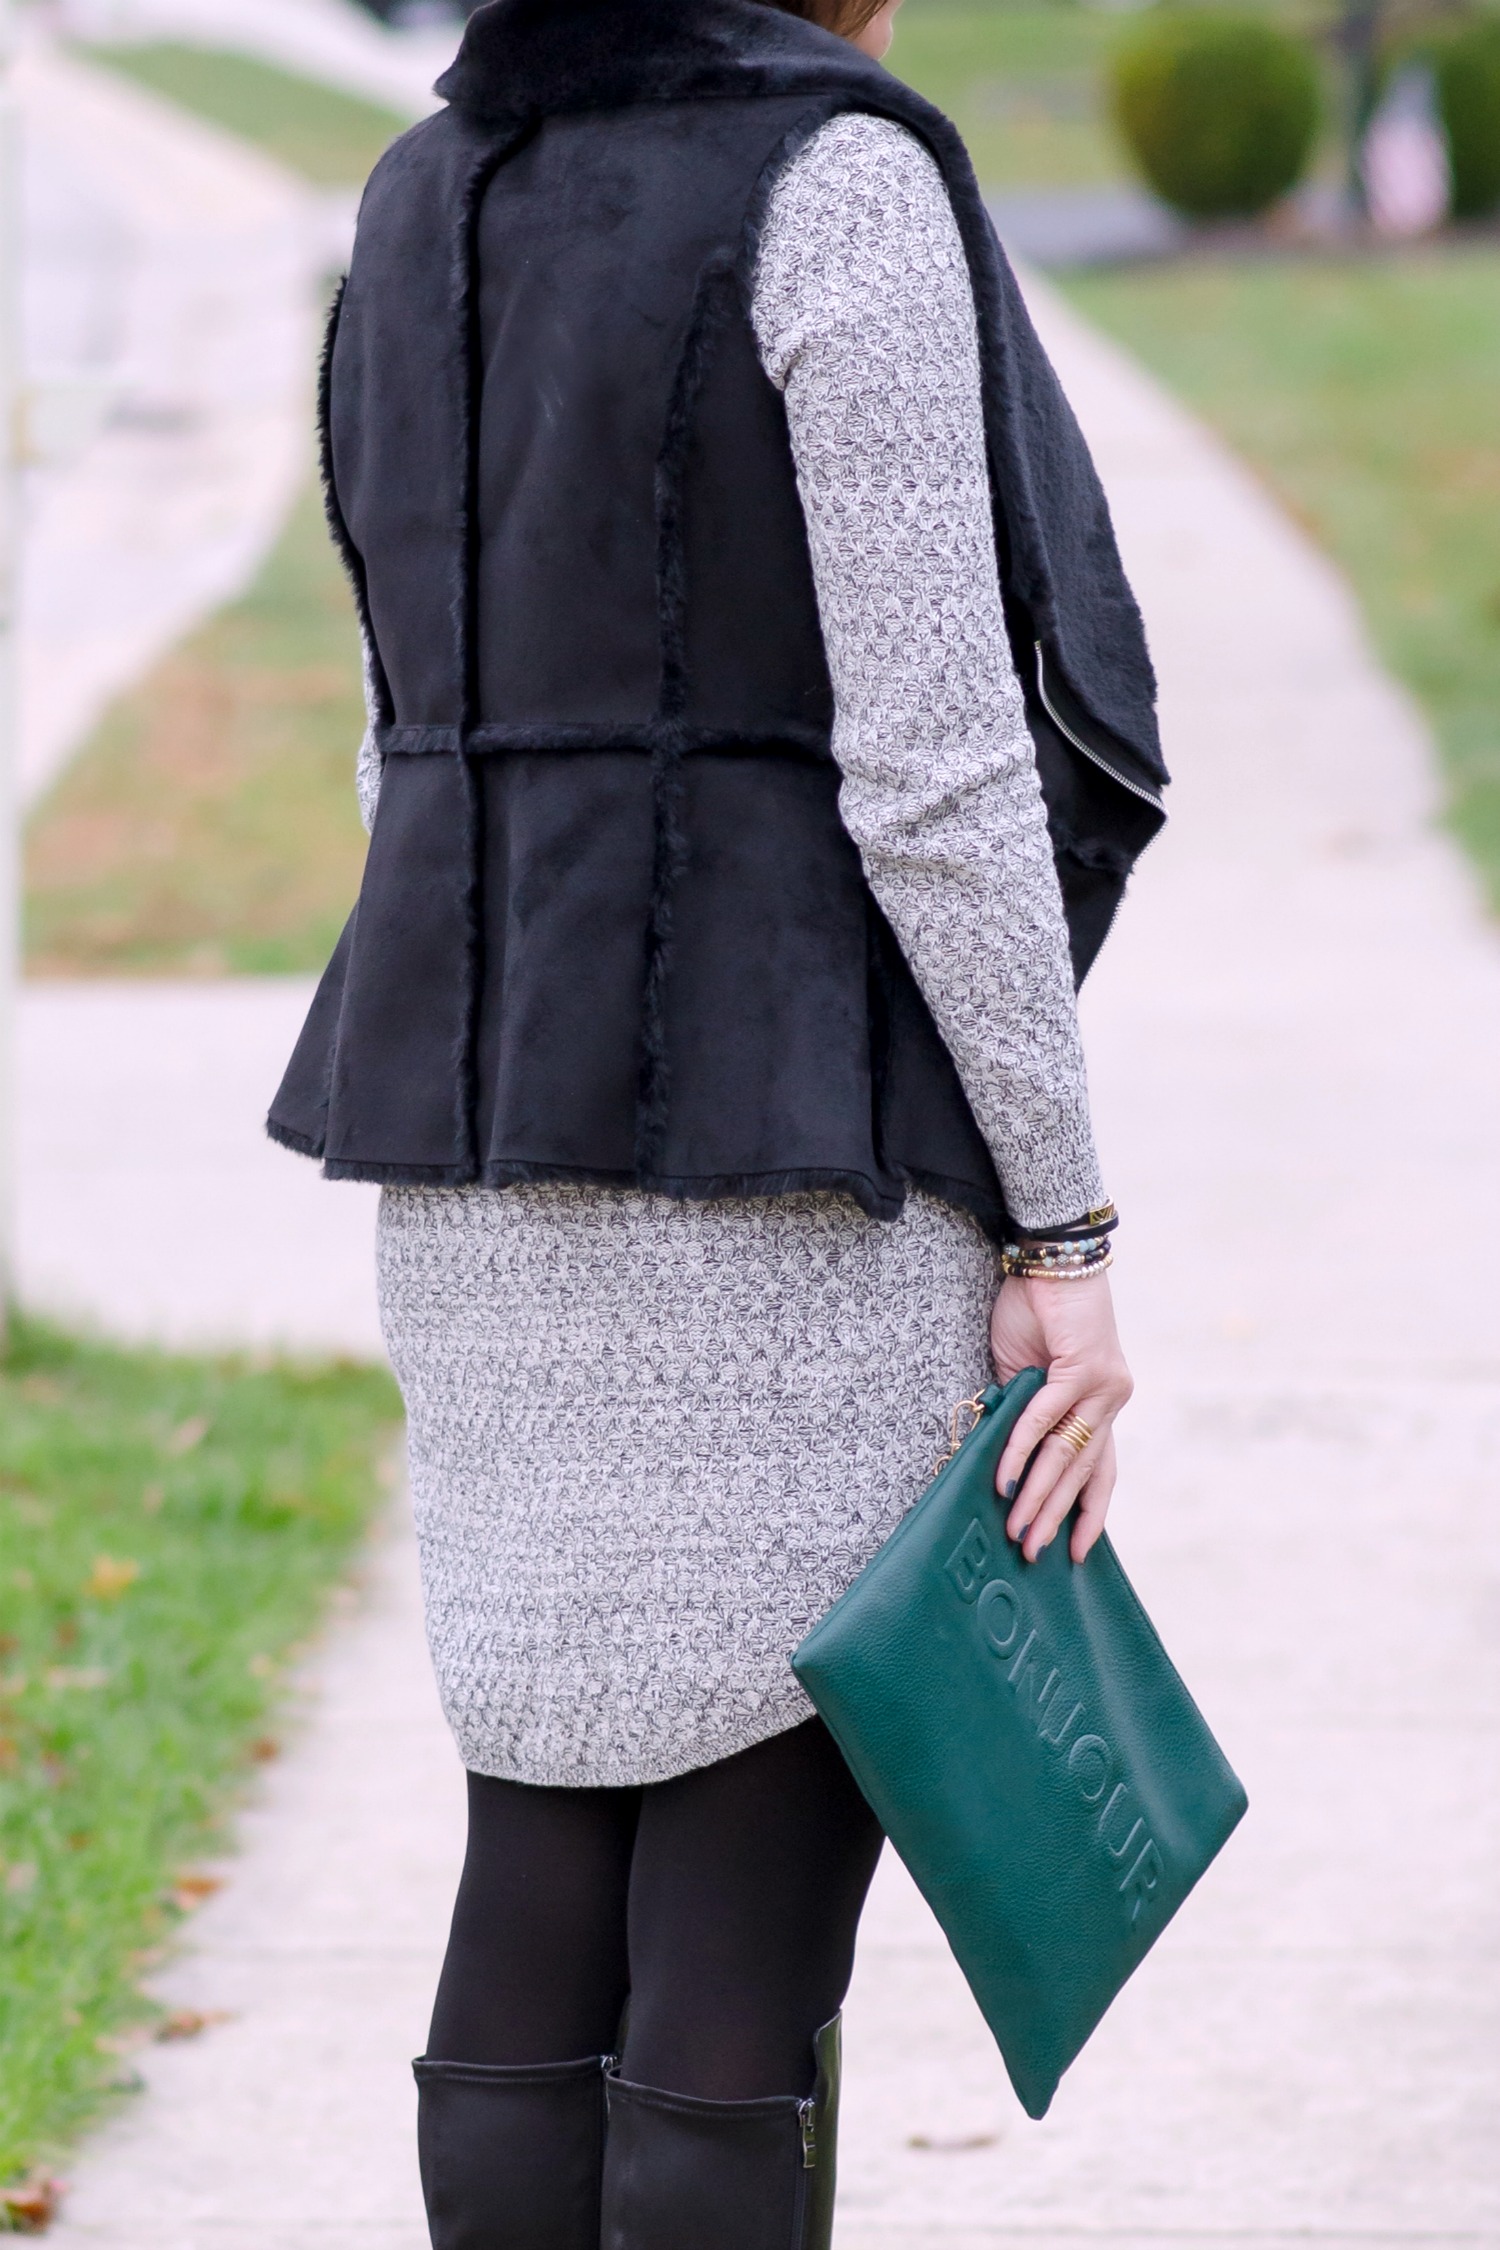 3 Trendy Ways to Wear a Sweater Dress for 2015